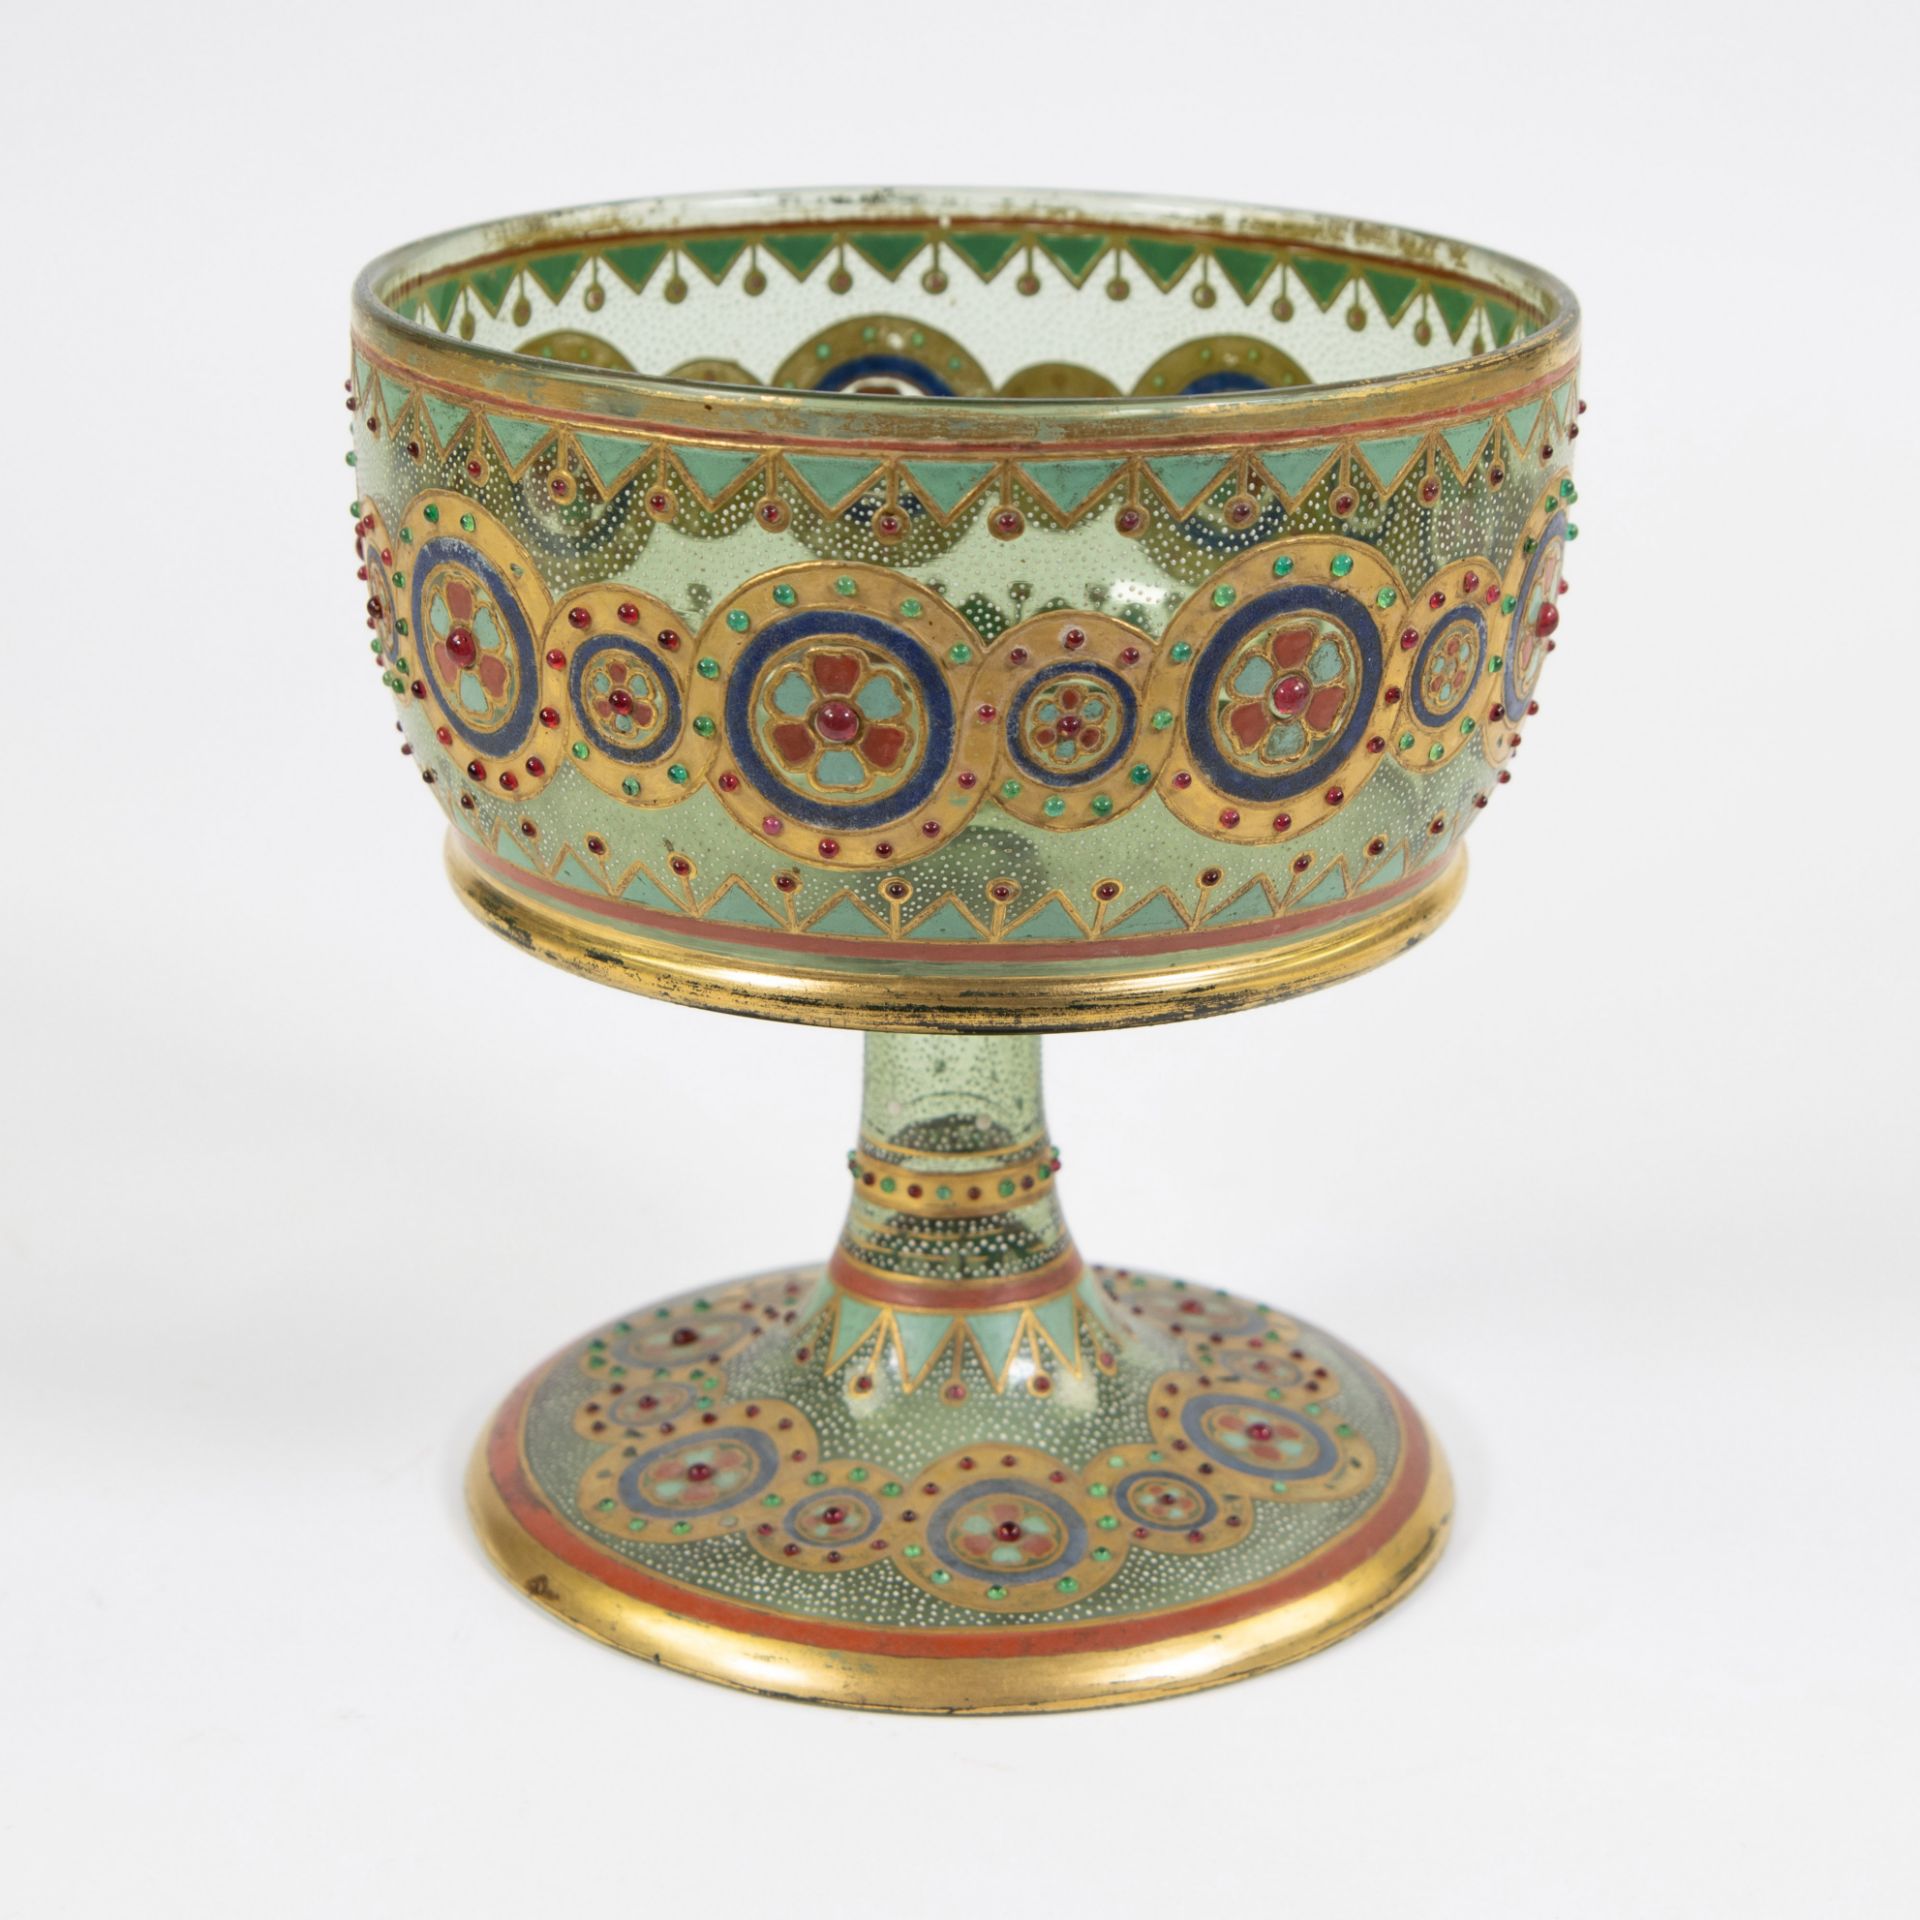 19th century Venetian glass coupe hand-painted and enamelled